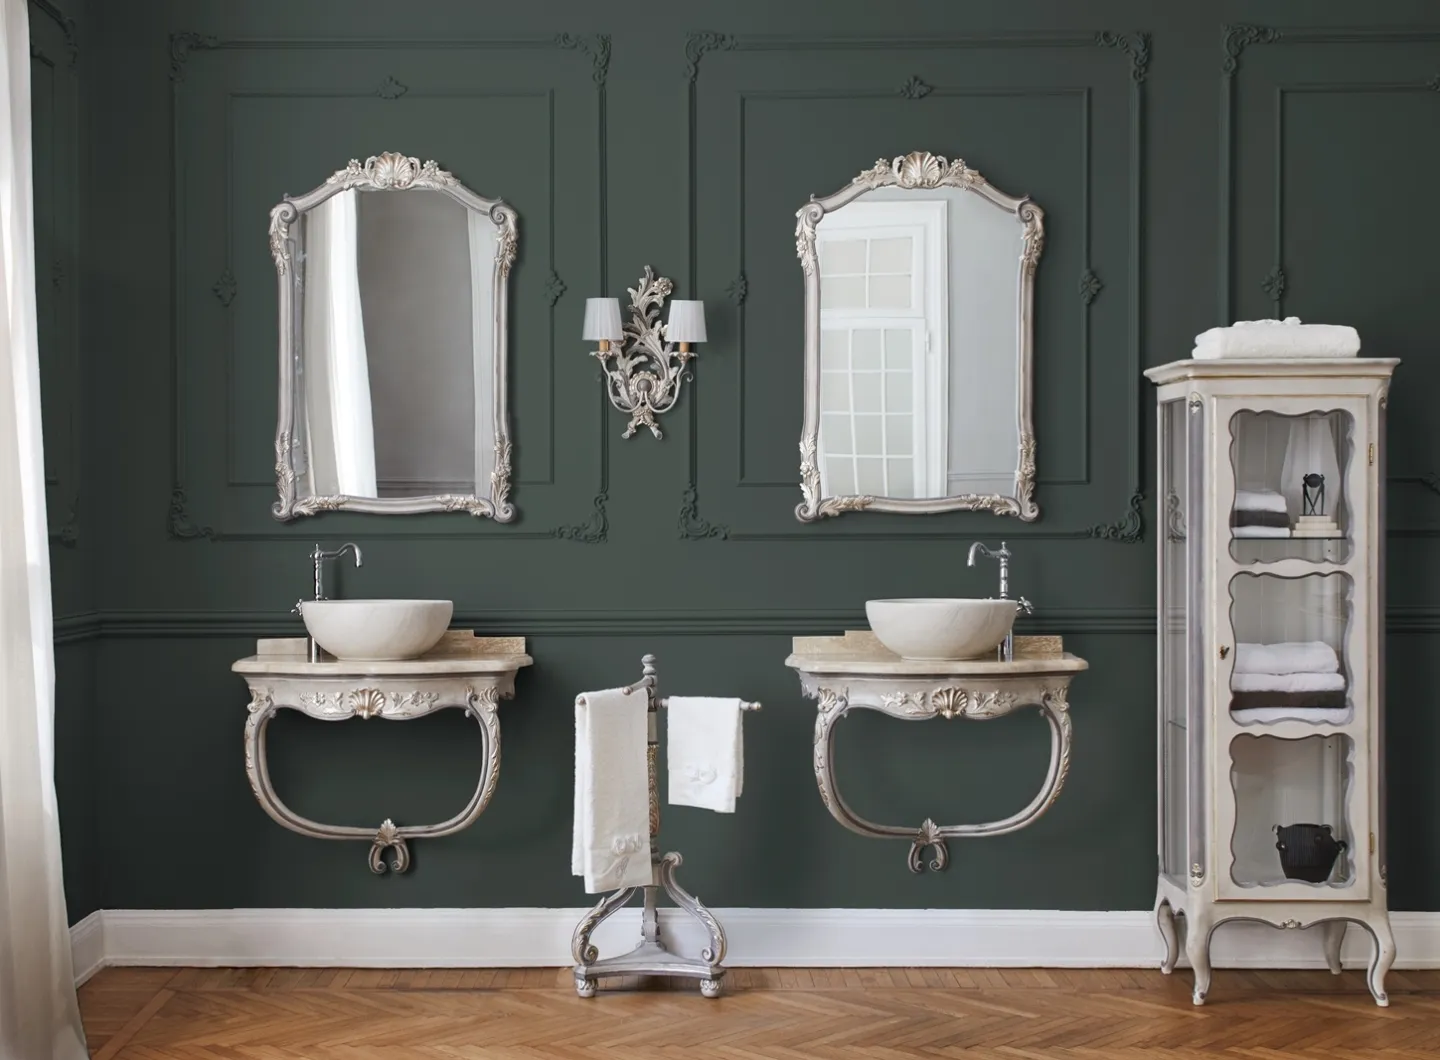 Bathroom console with mirror and hand-decorated display cabinet